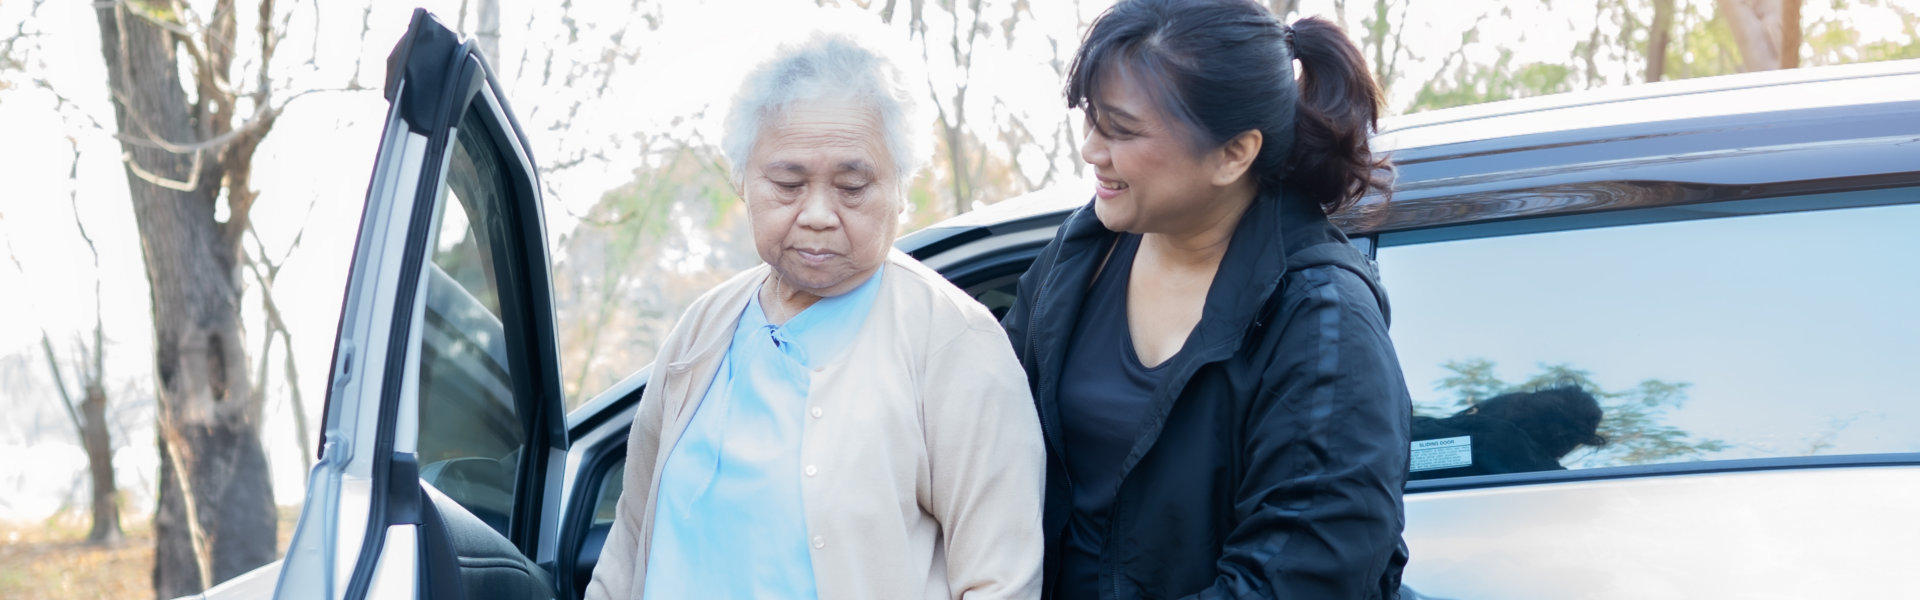 woman guiding senior woman in getting off the vehicle